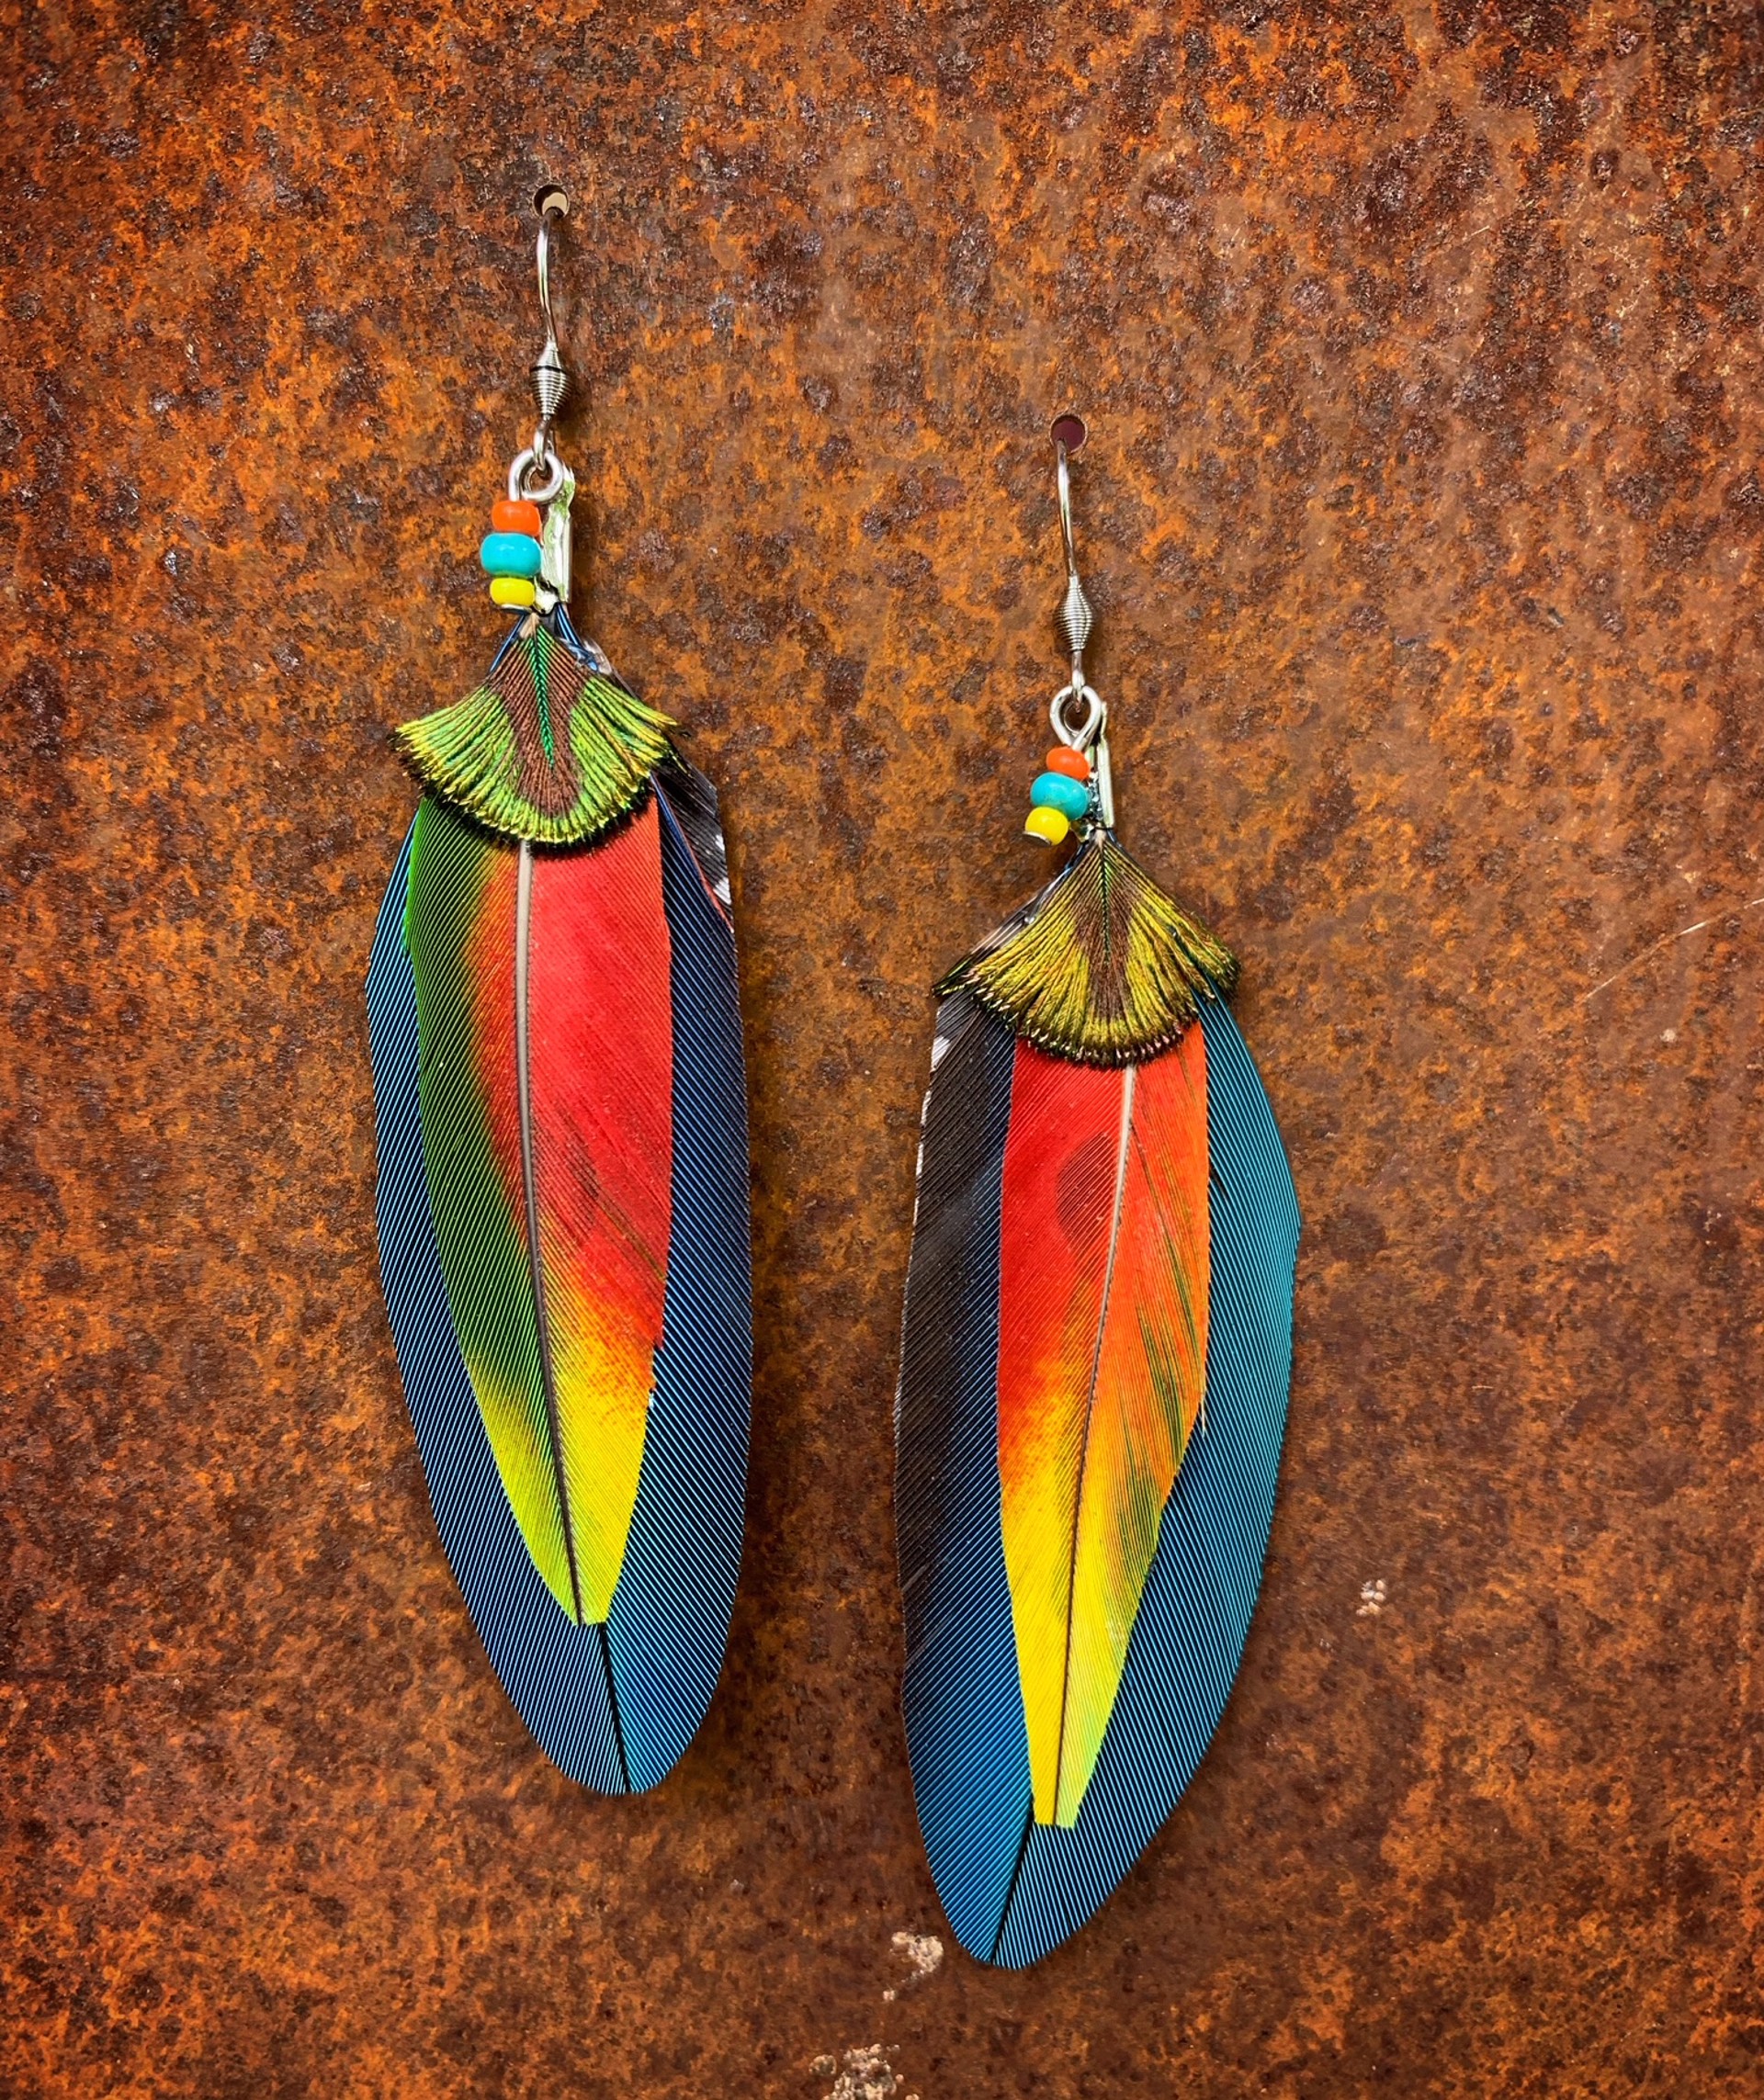 K833 Ethically Sourced Parrot Earrings by Kelly Ormsby